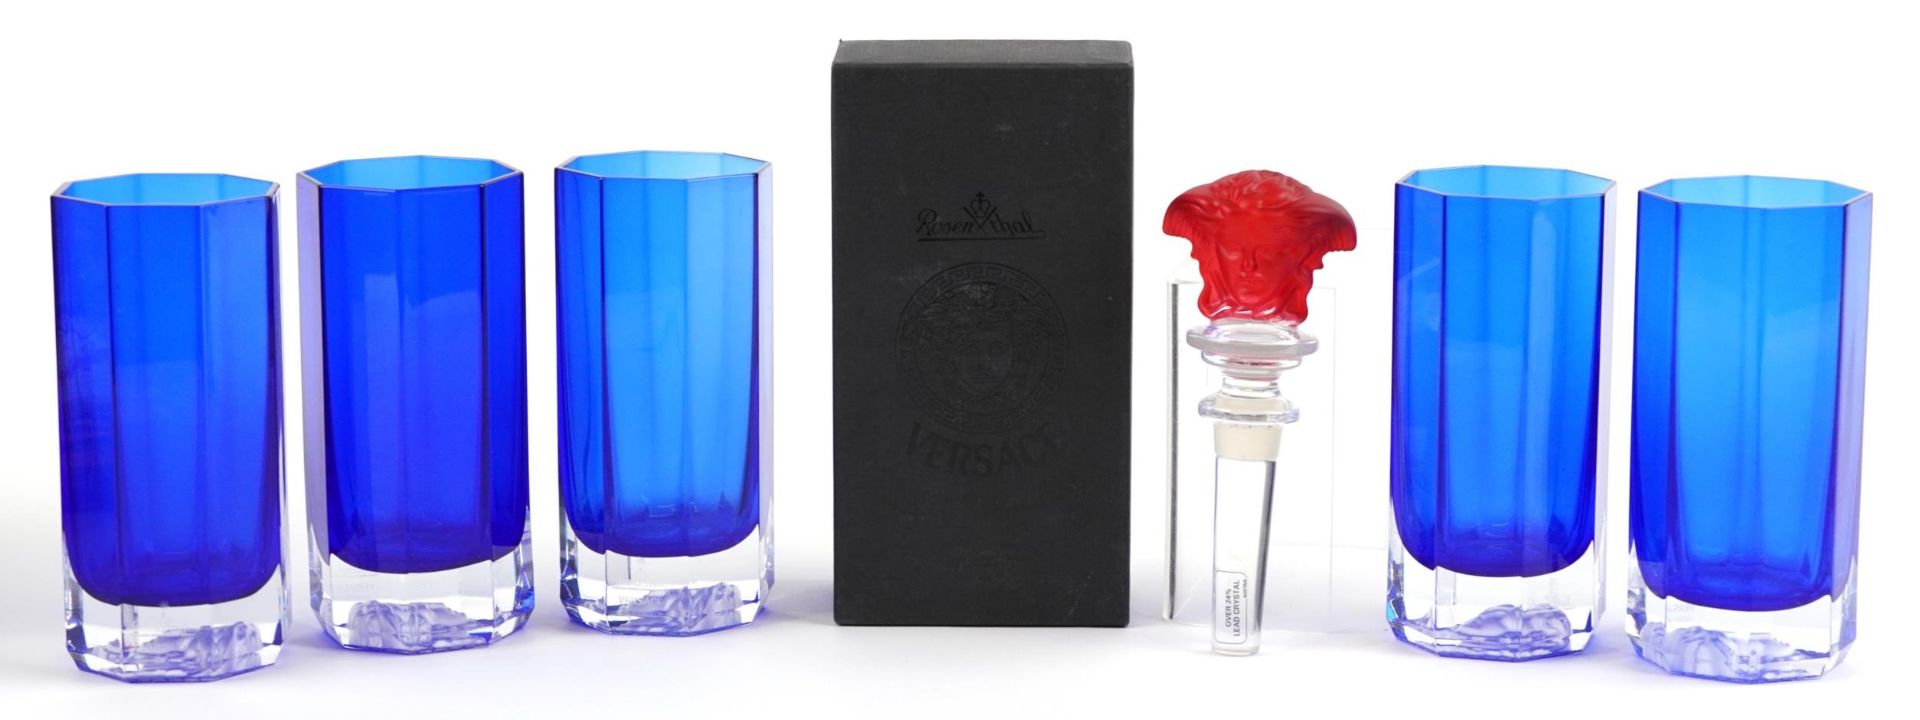 Versace bottle stopper with box by Rosenthal and five Versace Medusa drinking glasses, each glass